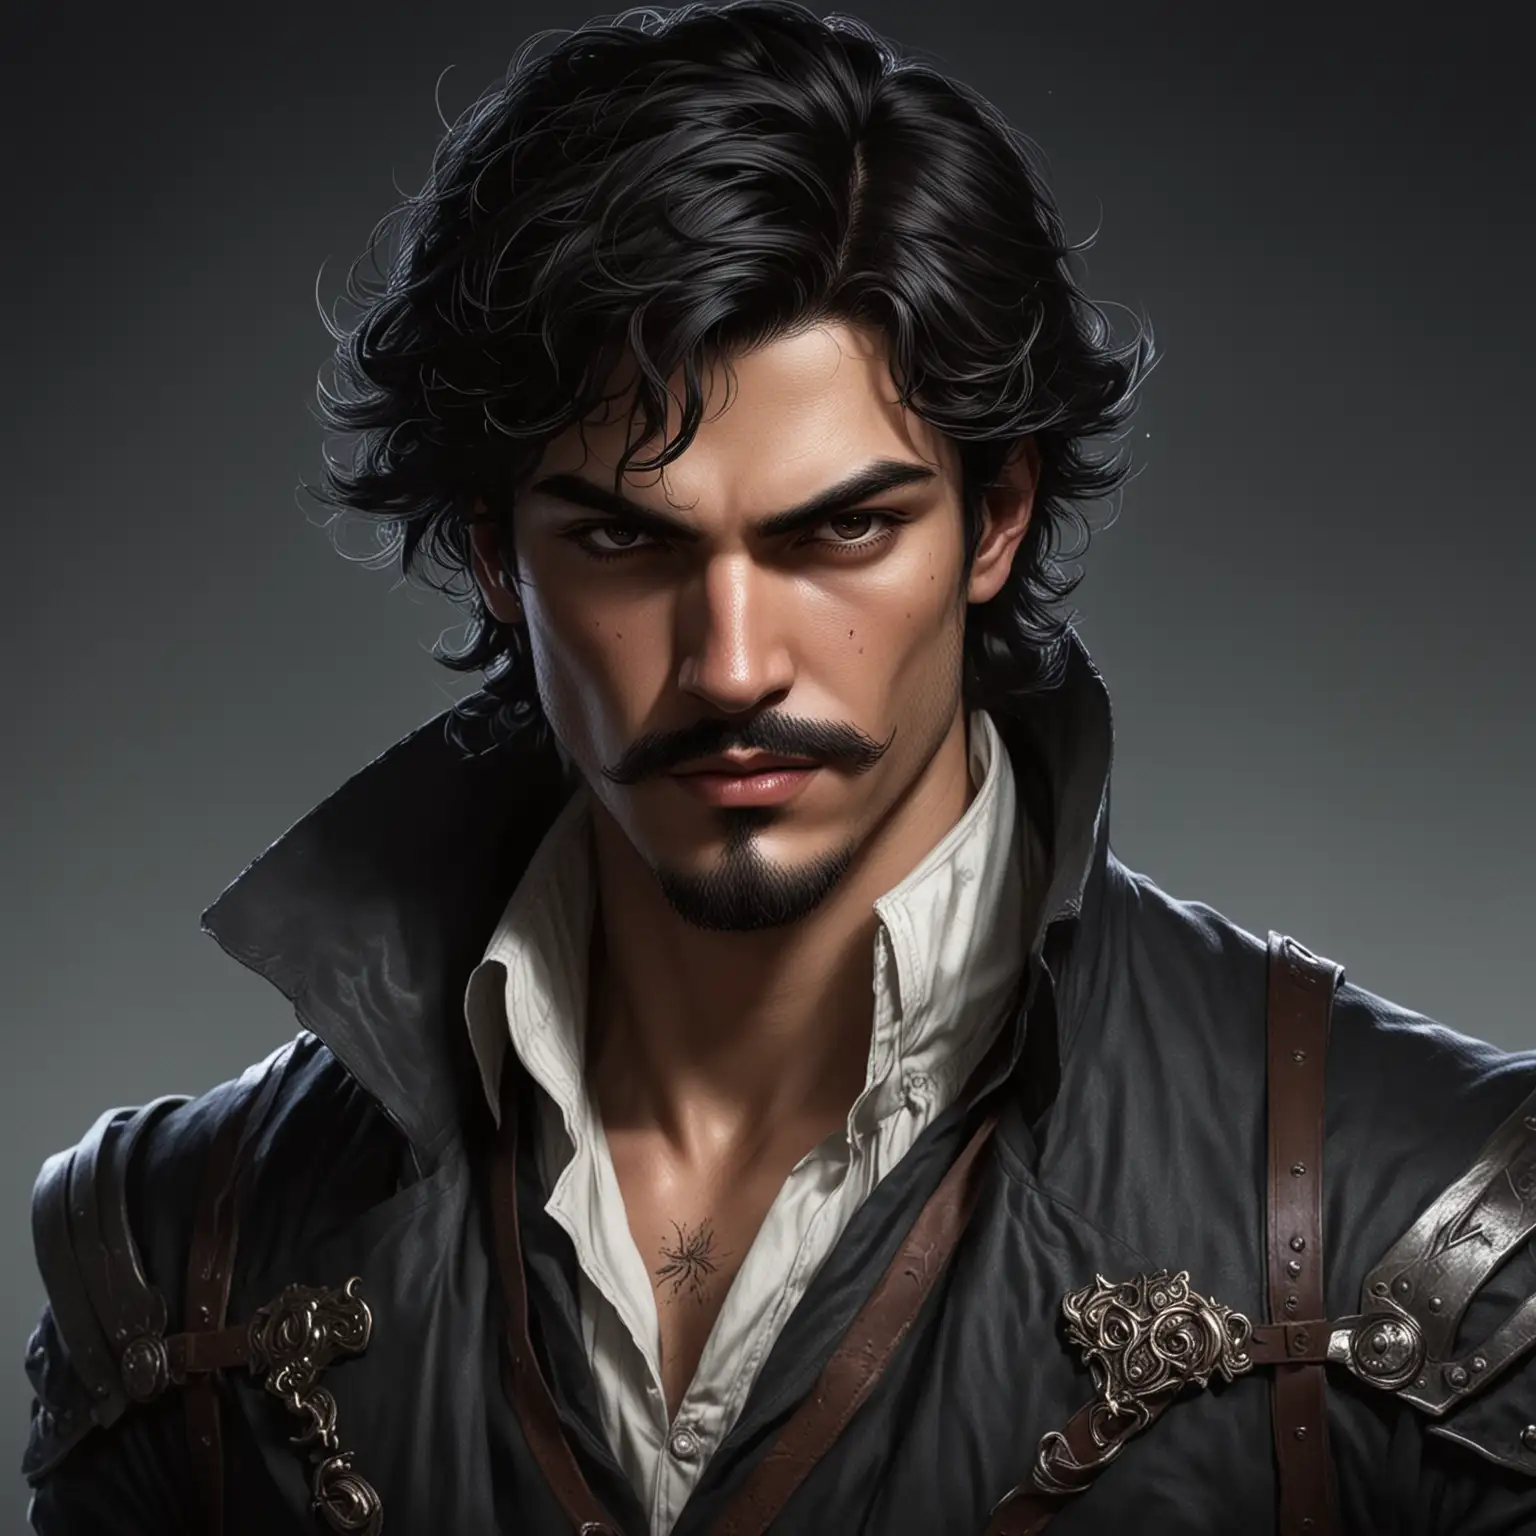 Male Fantasy rogue, he is intimidating, black hair, curled mustache, artwork